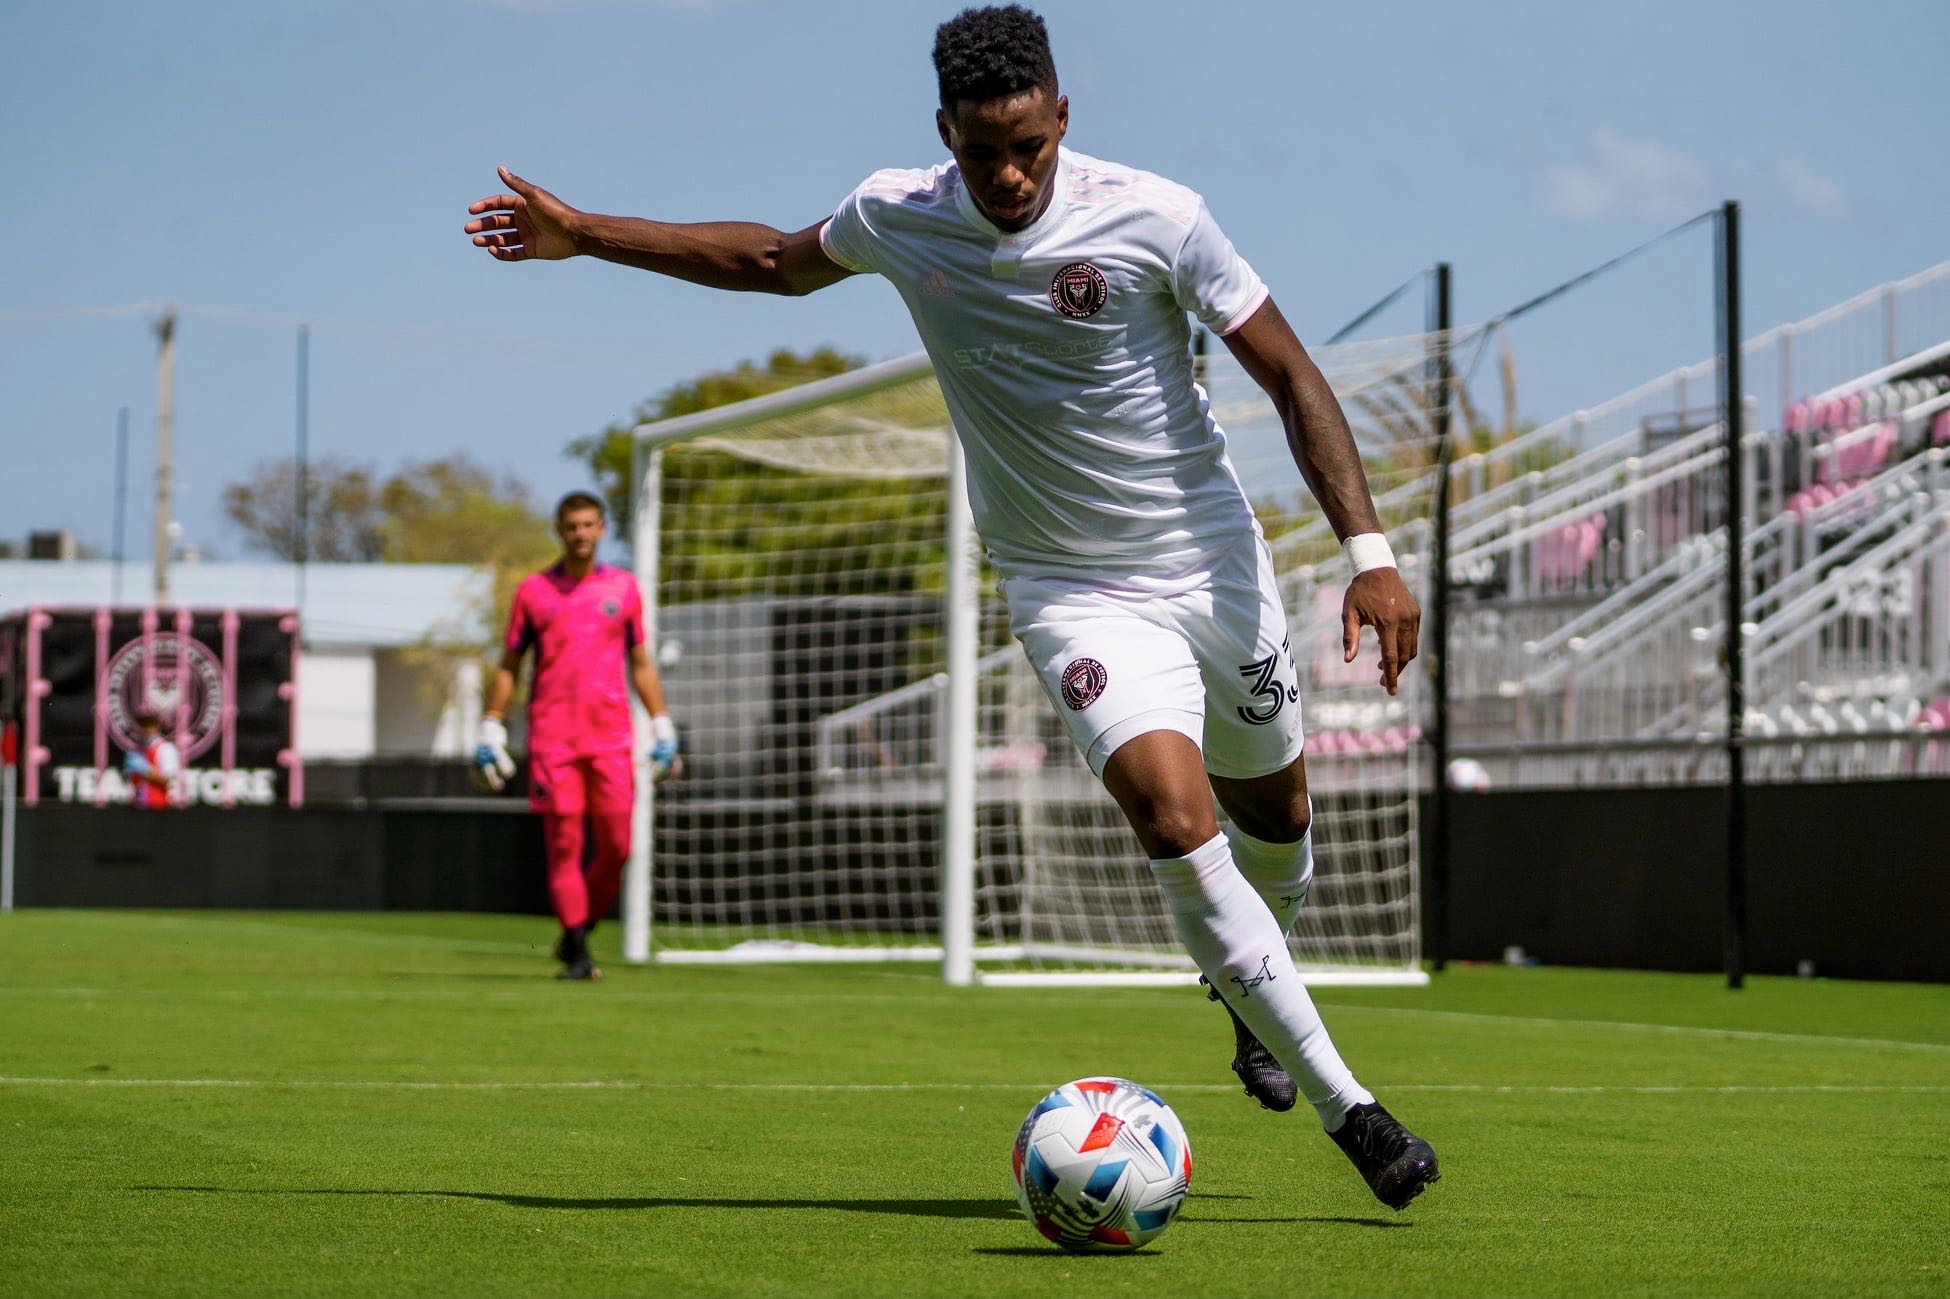 Joevin Jones playing for the White Heron team during Inter Miami's final intrasquad scrimmage before the start of the 2021 season.